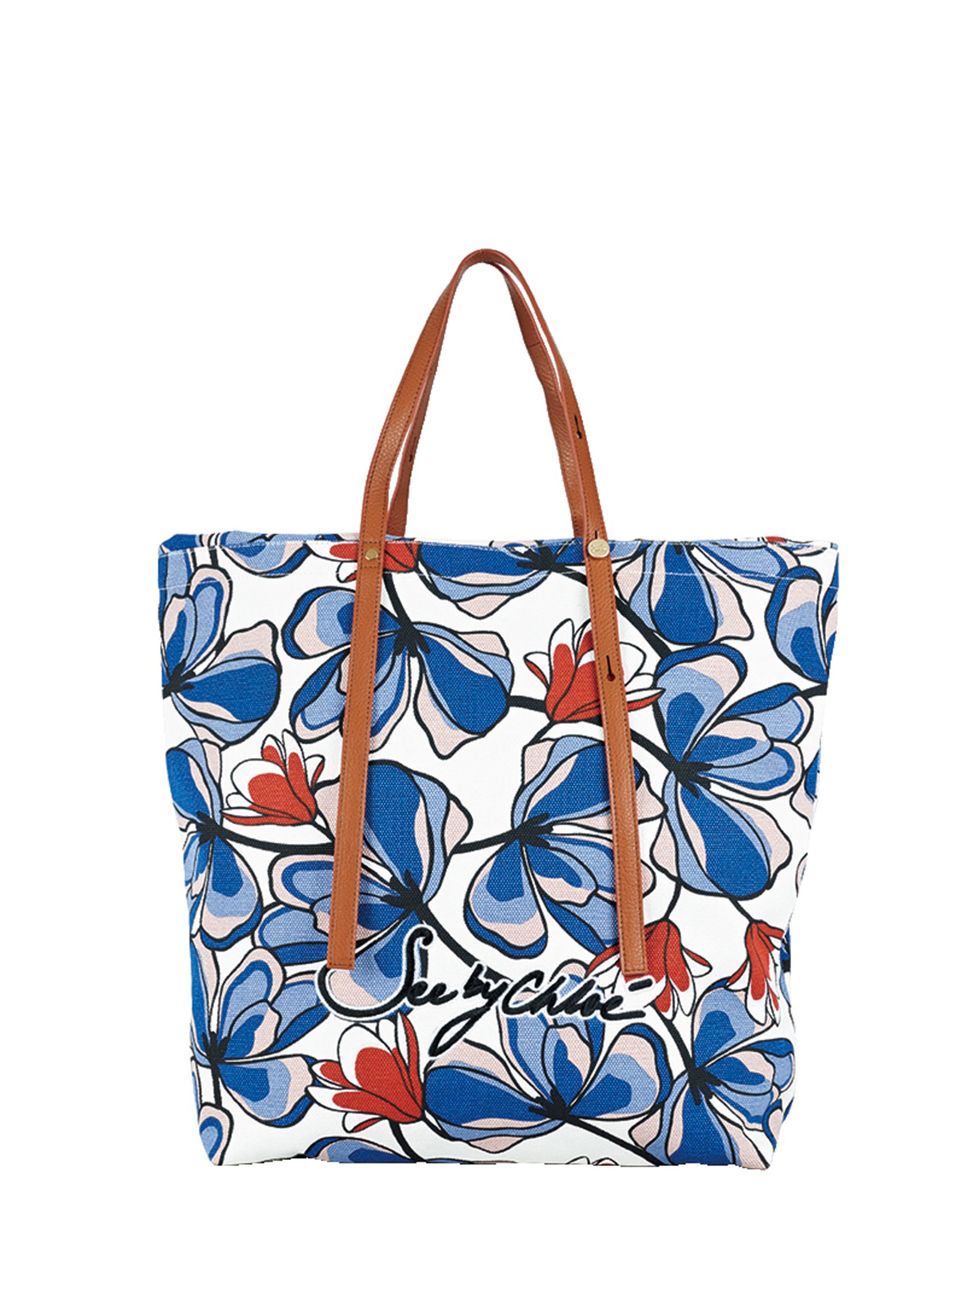 Bag, Style, Fashion accessory, Shoulder bag, Luggage and bags, Azure, Pattern, Electric blue, Tote bag, Handbag, 